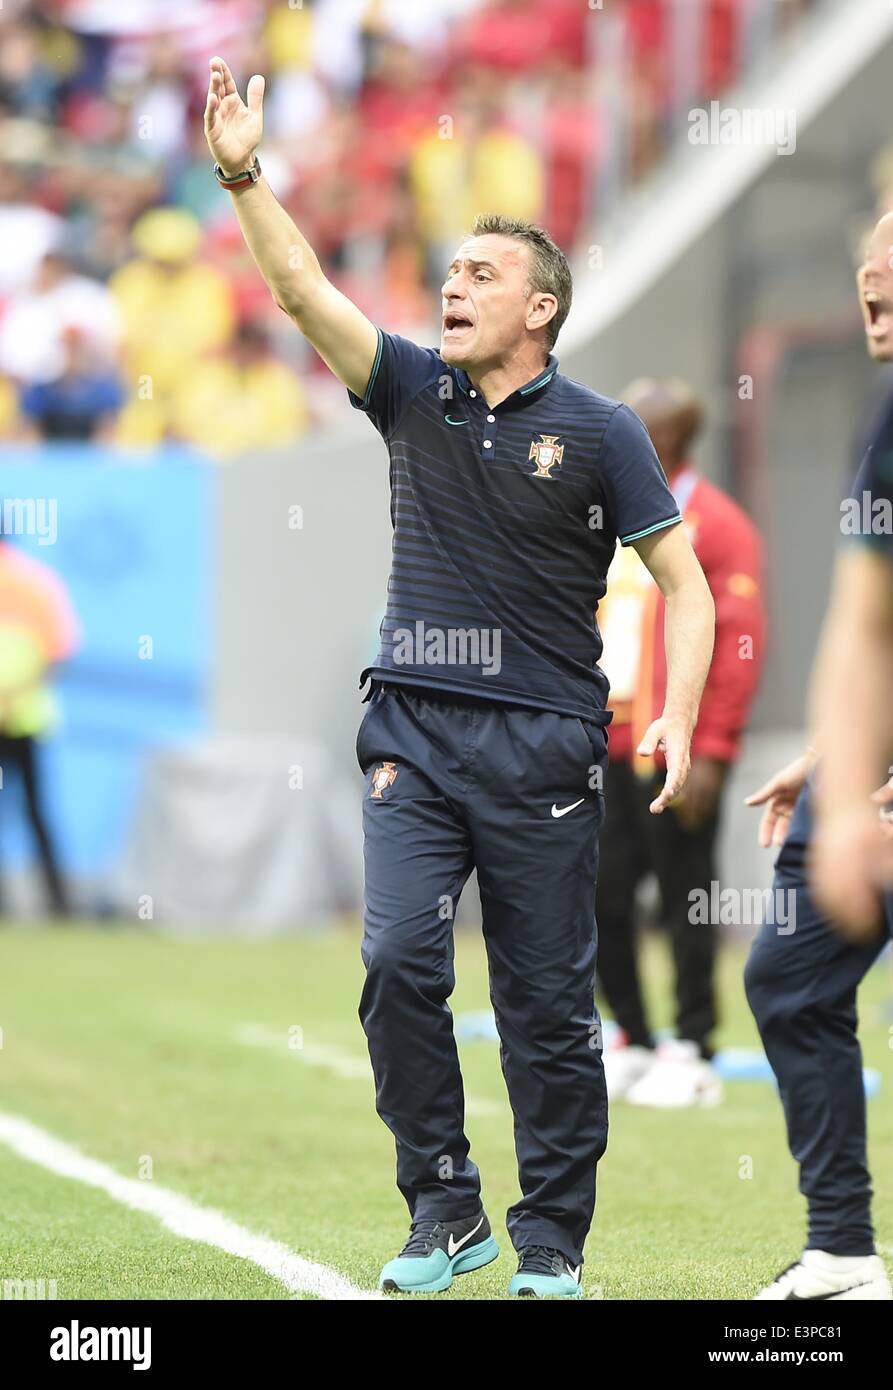 Brasilia, Brazil. 26th June, 2014. Portugal's head coach Paulo Bento gives instructions during a Group G match between Portugal and Ghana of 2014 FIFA World Cup at the Estadio Nacional Stadium in Brasilia, Brazil, June 26, 2014. Credit:  Qi Heng/Xinhua/Alamy Live News Stock Photo